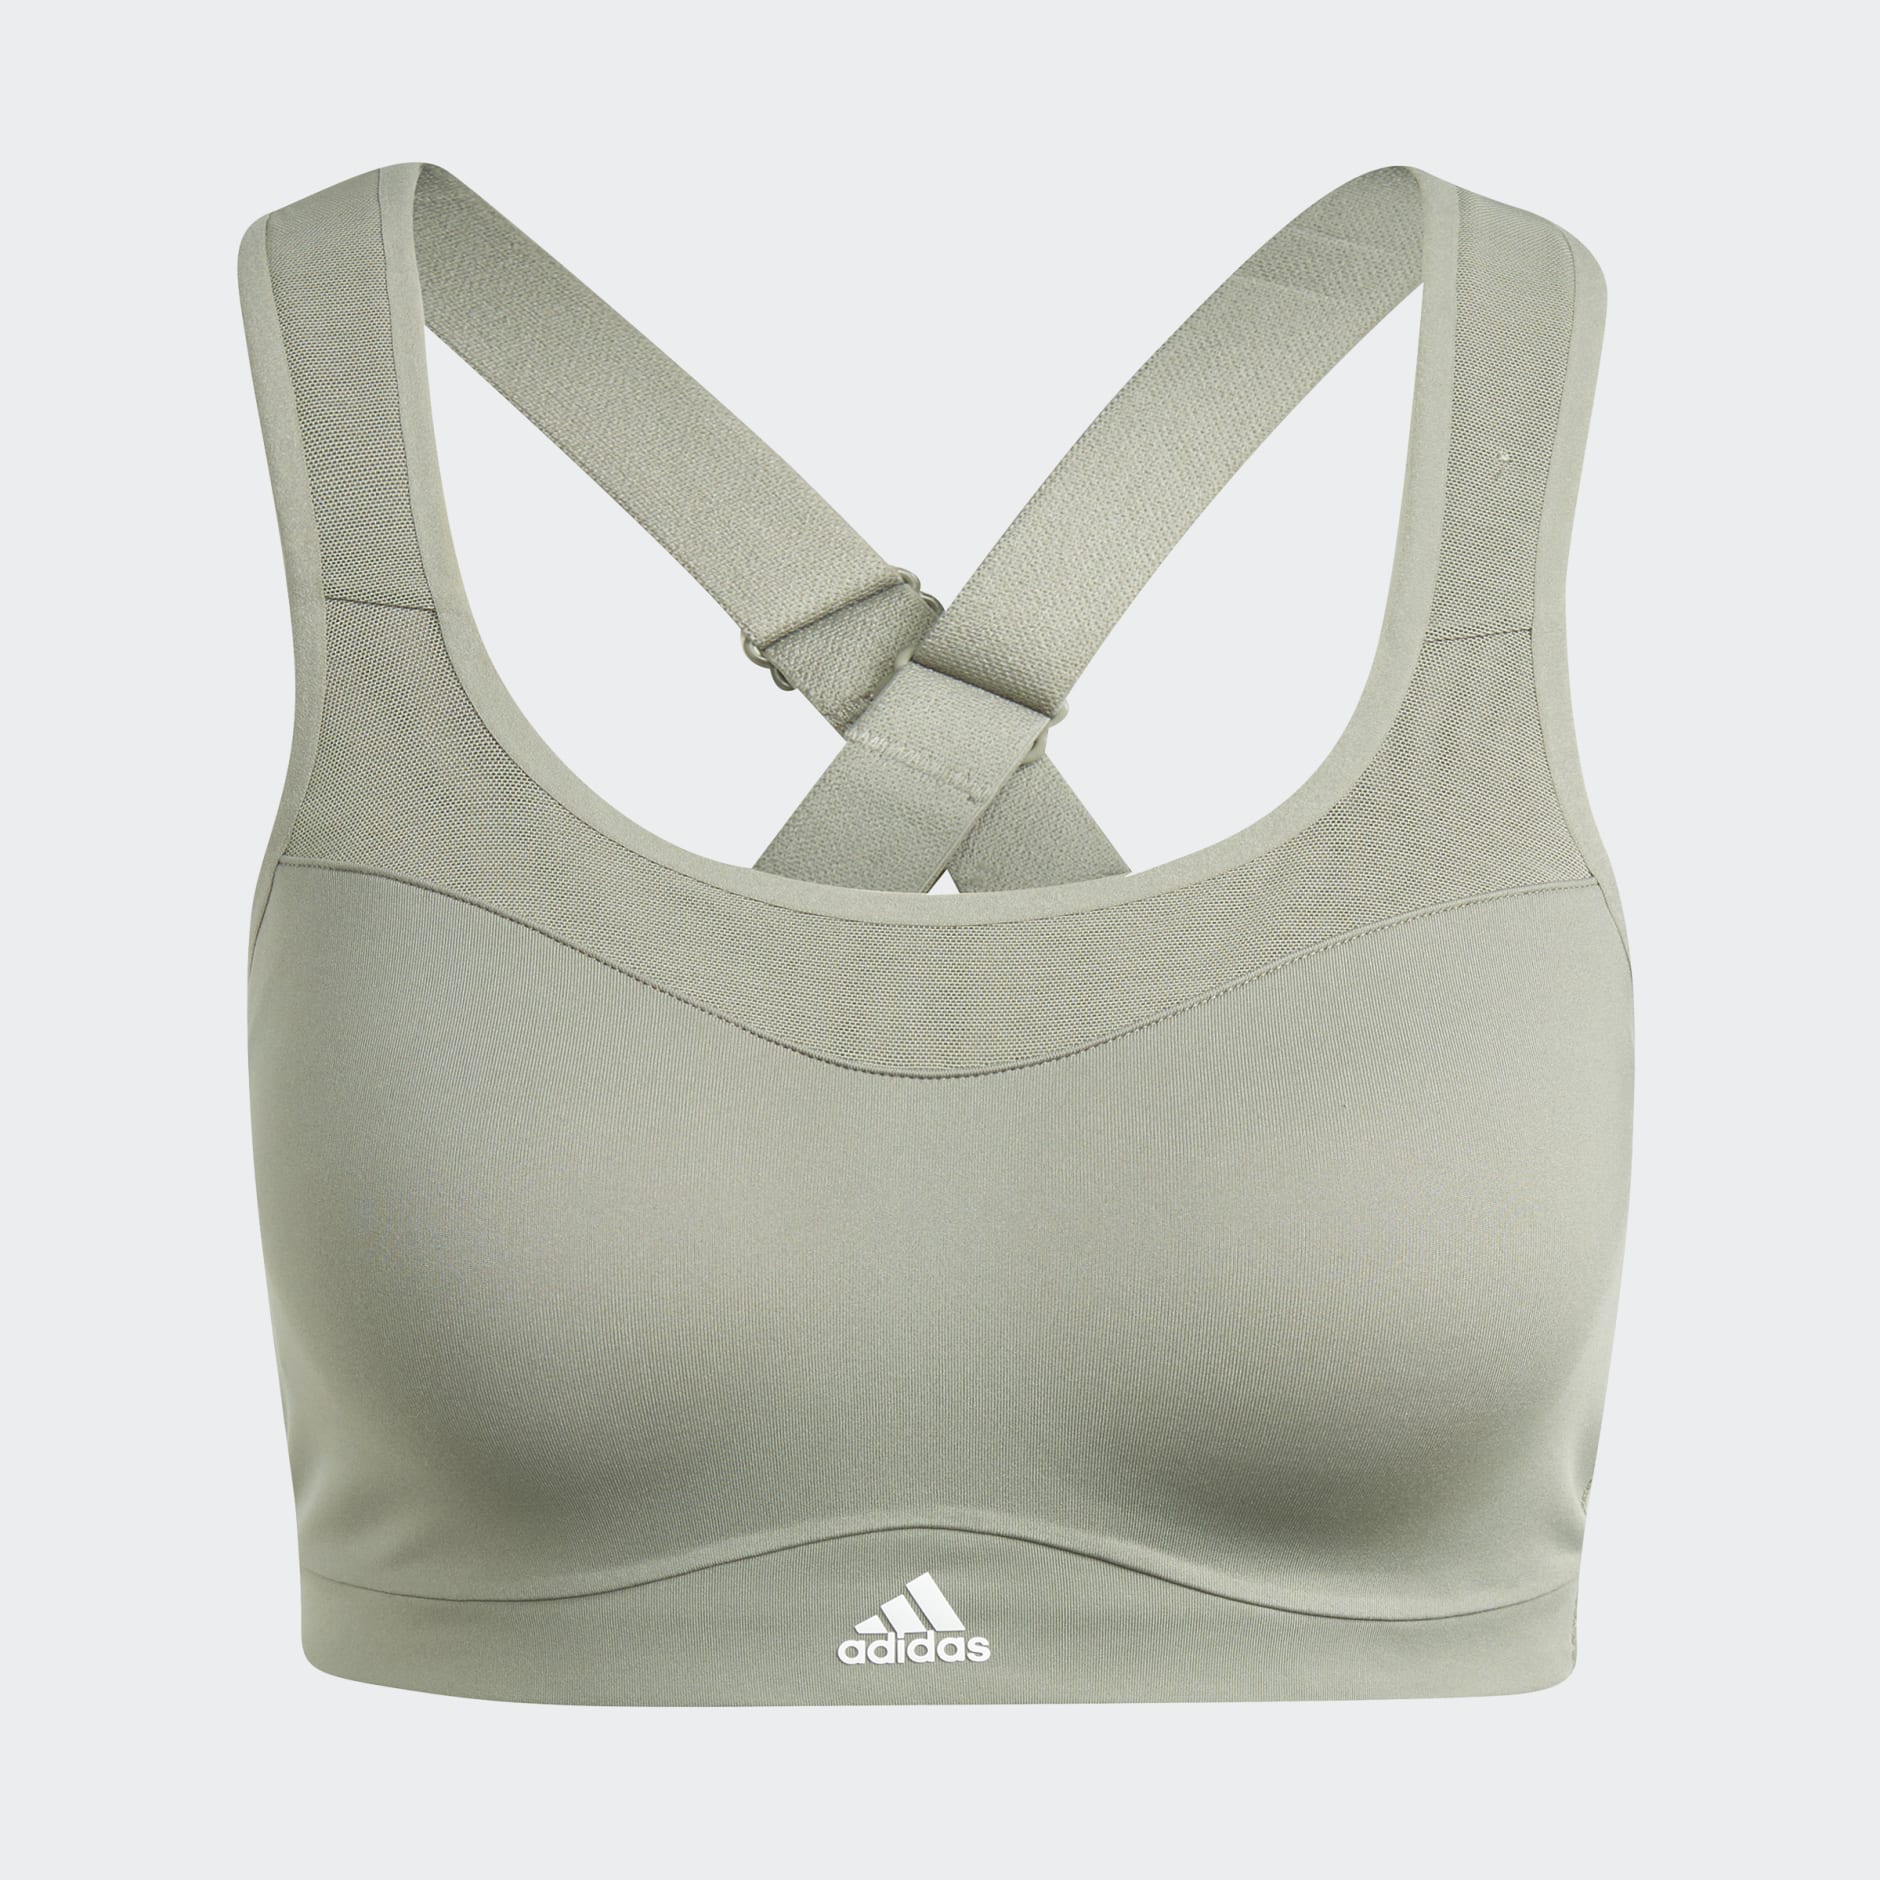 Women's Clothing - adidas TLRD Impact Training High-Support Bra - Green ...